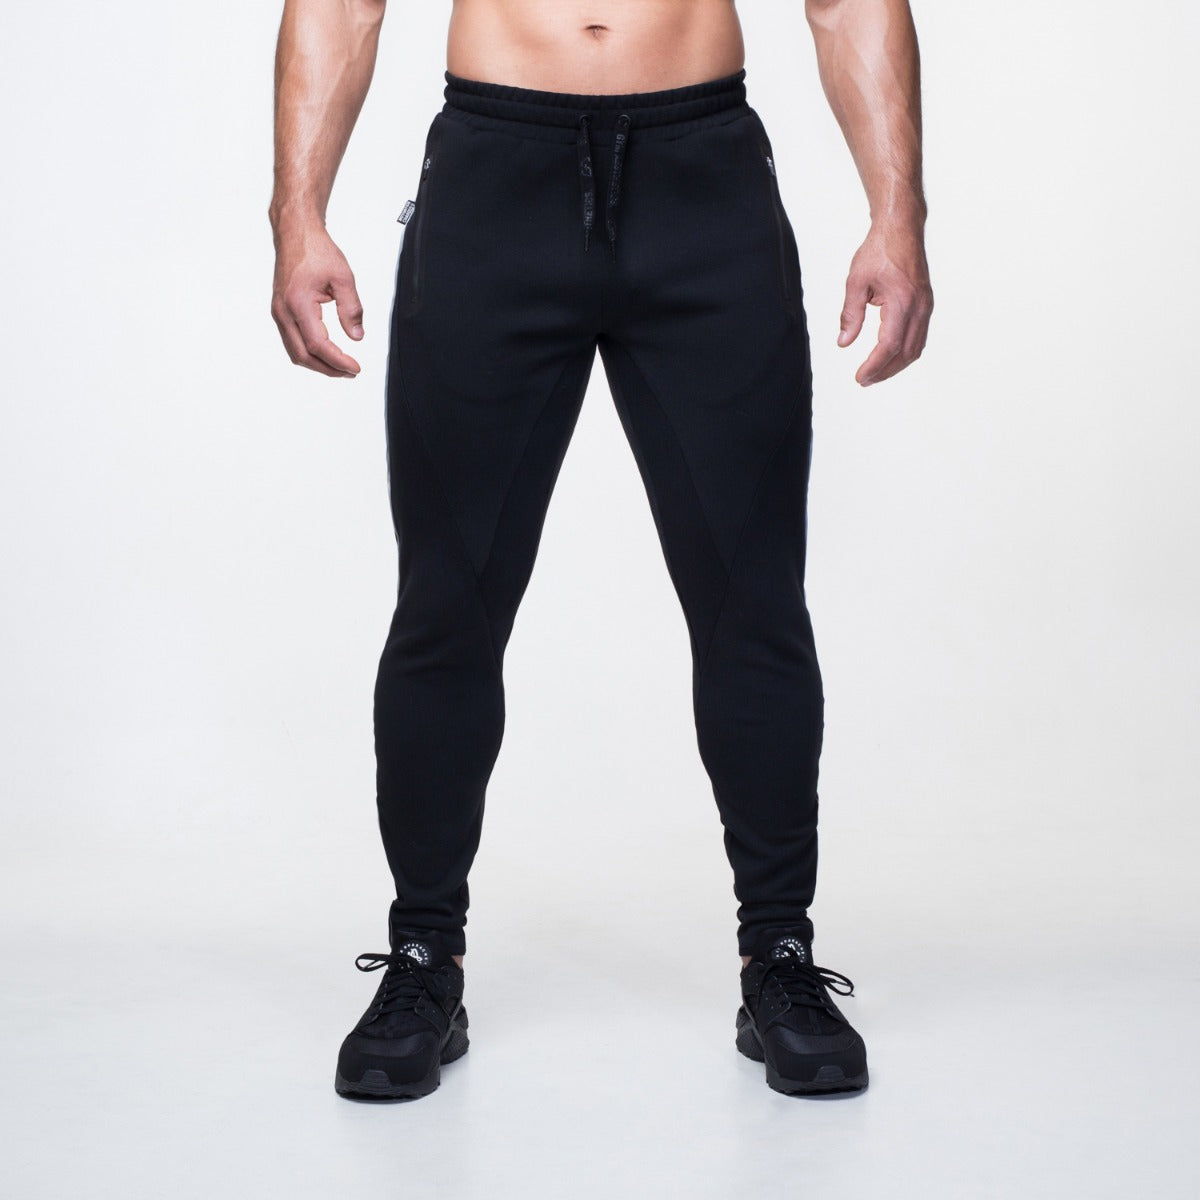 Boys' Soft Gym Jogger Pants - All in Motion Black XS 1 ct